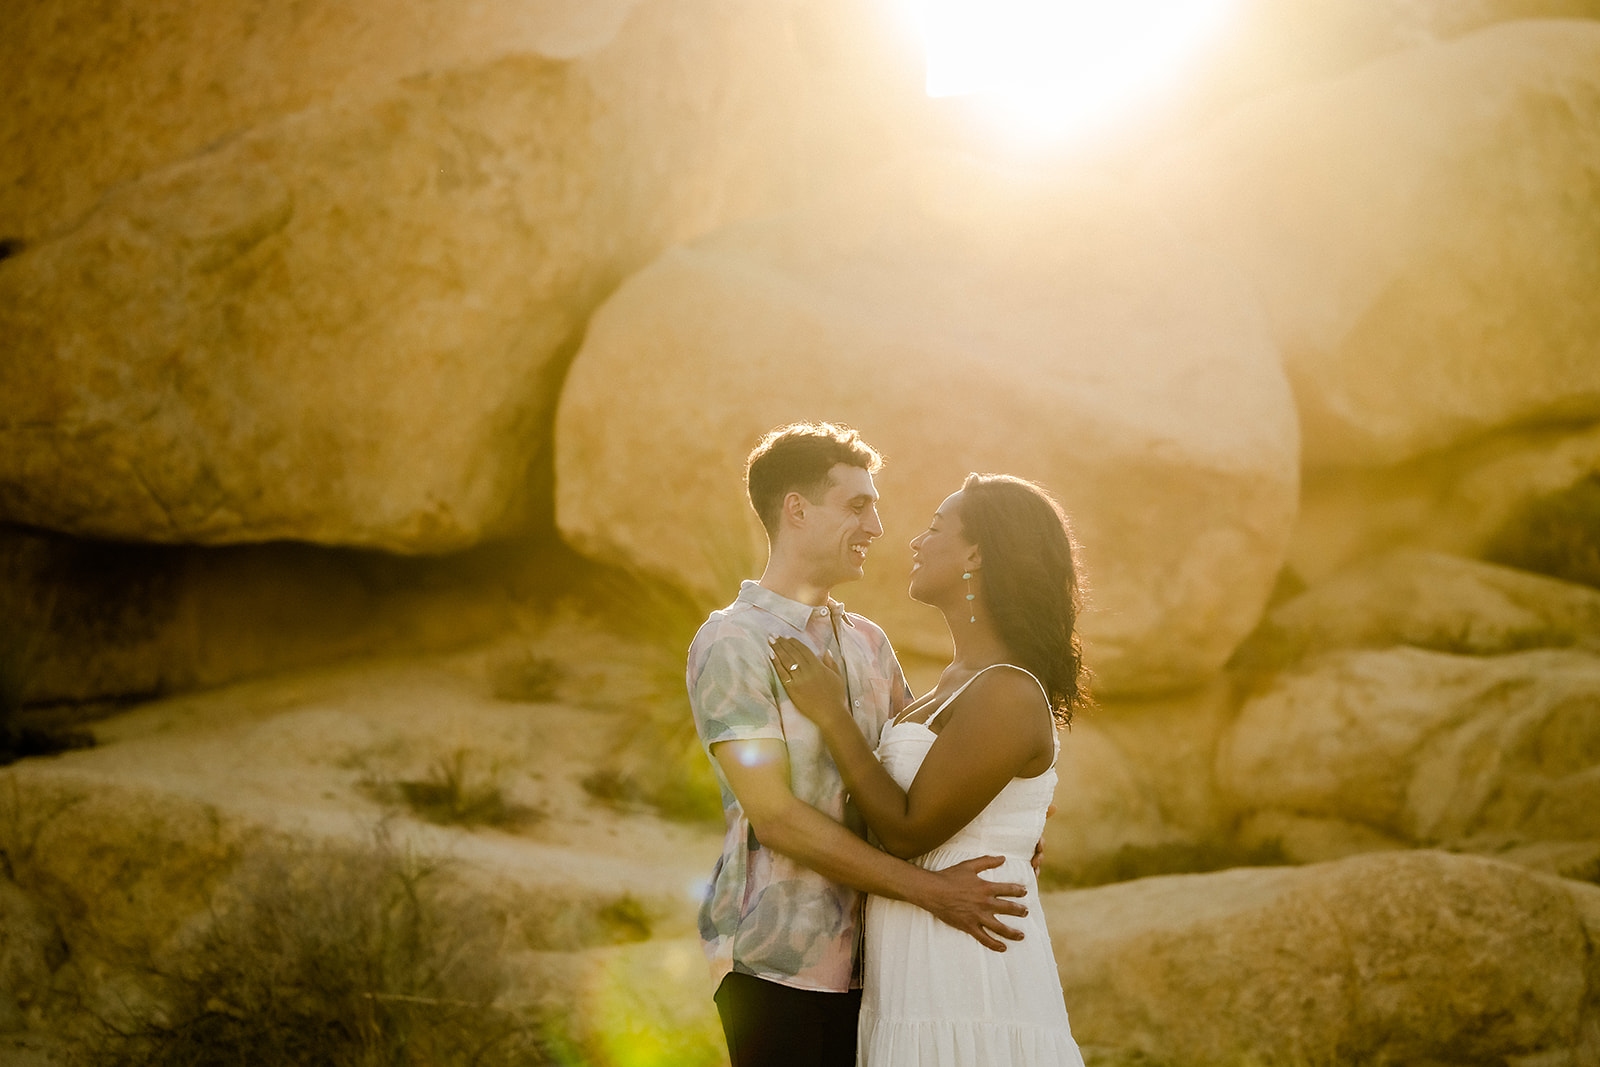 Engagement Session in Joshua Tree National Park. Wedding and Elopement Photographer for Joshua Tree